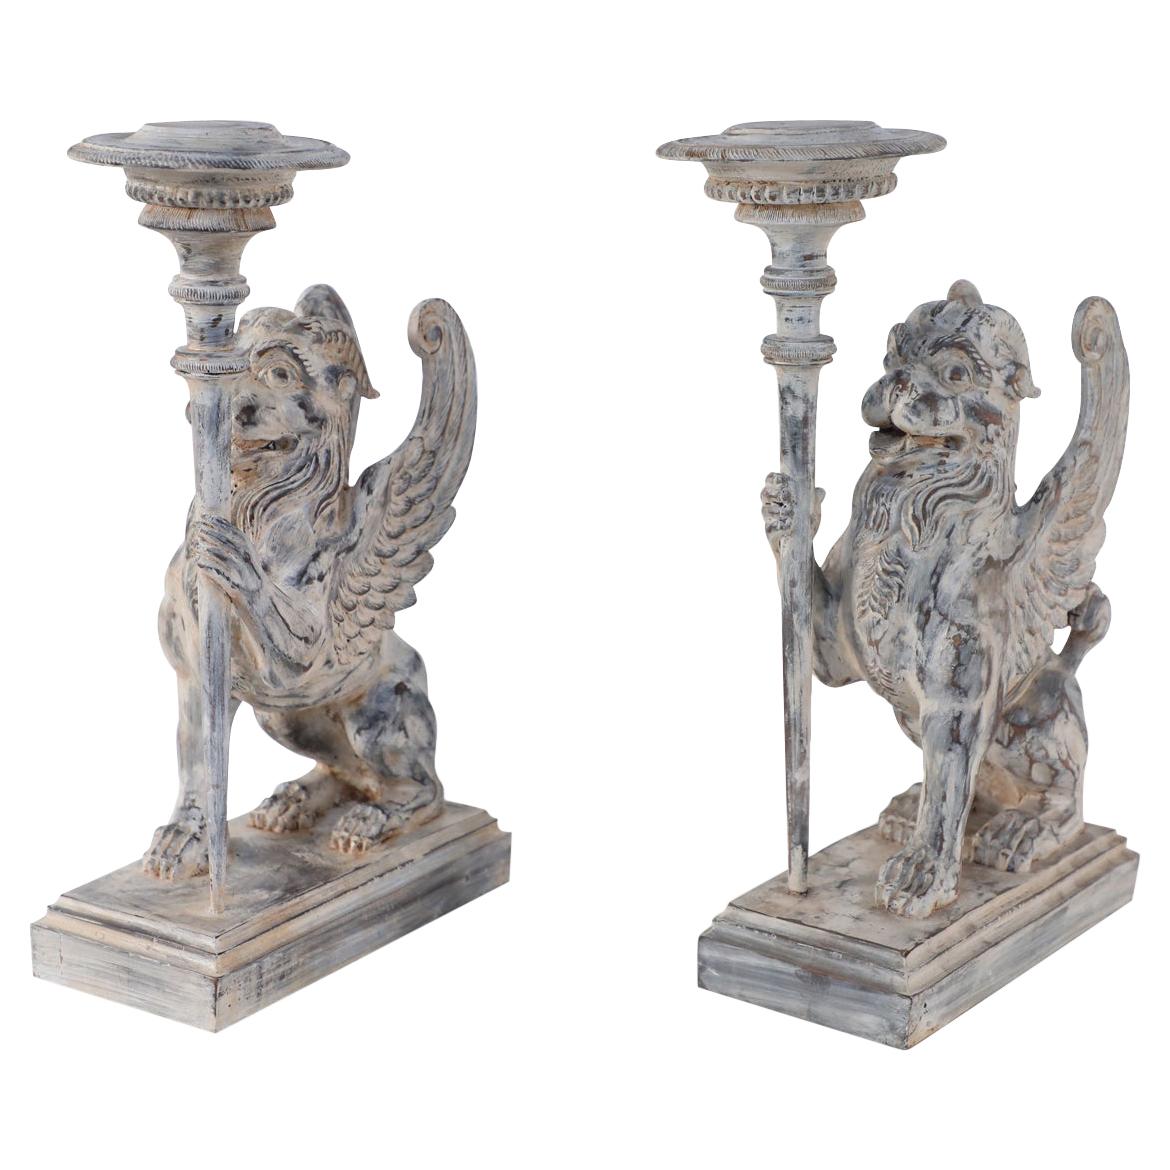 Pair of Neoclassical Style Carved Chimera Form Candle Holders / Bookends